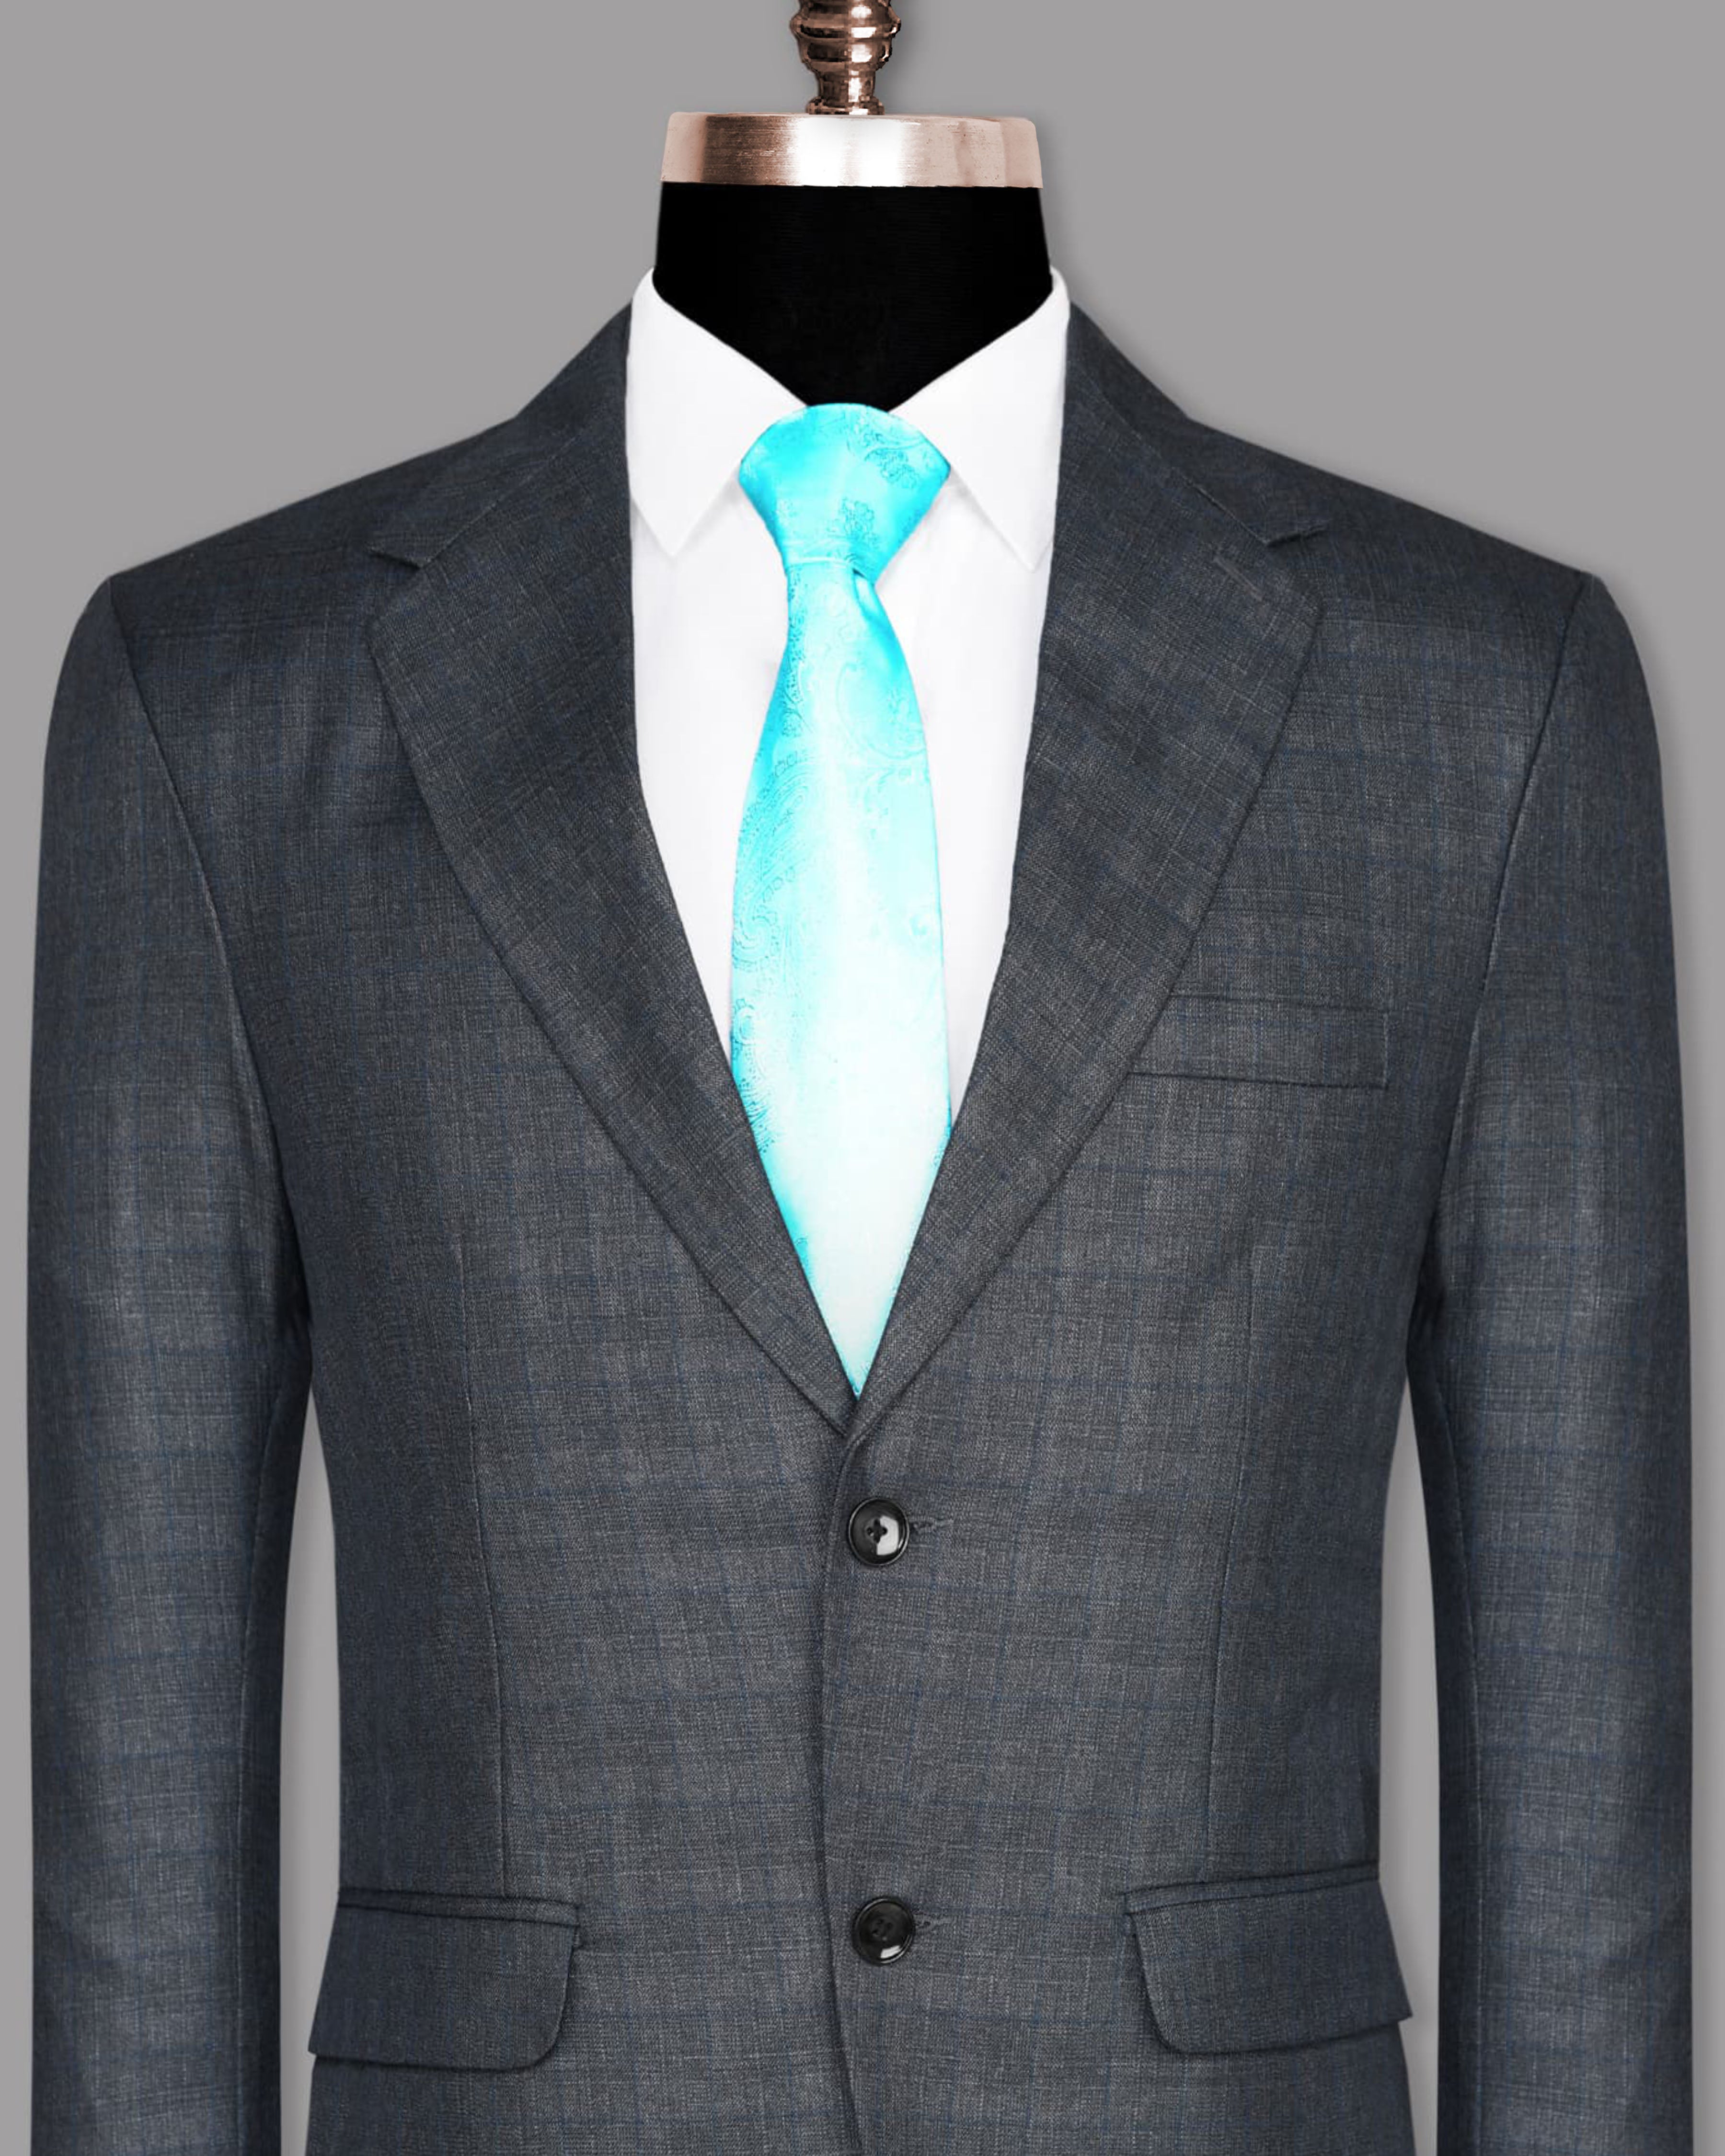 Charcoal with Subtle sky Windowpane Wool Blend Blazer BL789SB-42, BL789SB-48, BL789SB-46, BL789SB-36, BL789SB-38, BL789SB-60, BL789SB-40, BL789SB-52, BL789SB-58, BL789SB-56, BL789SB-54, BL789SB-44, BL789SB-50